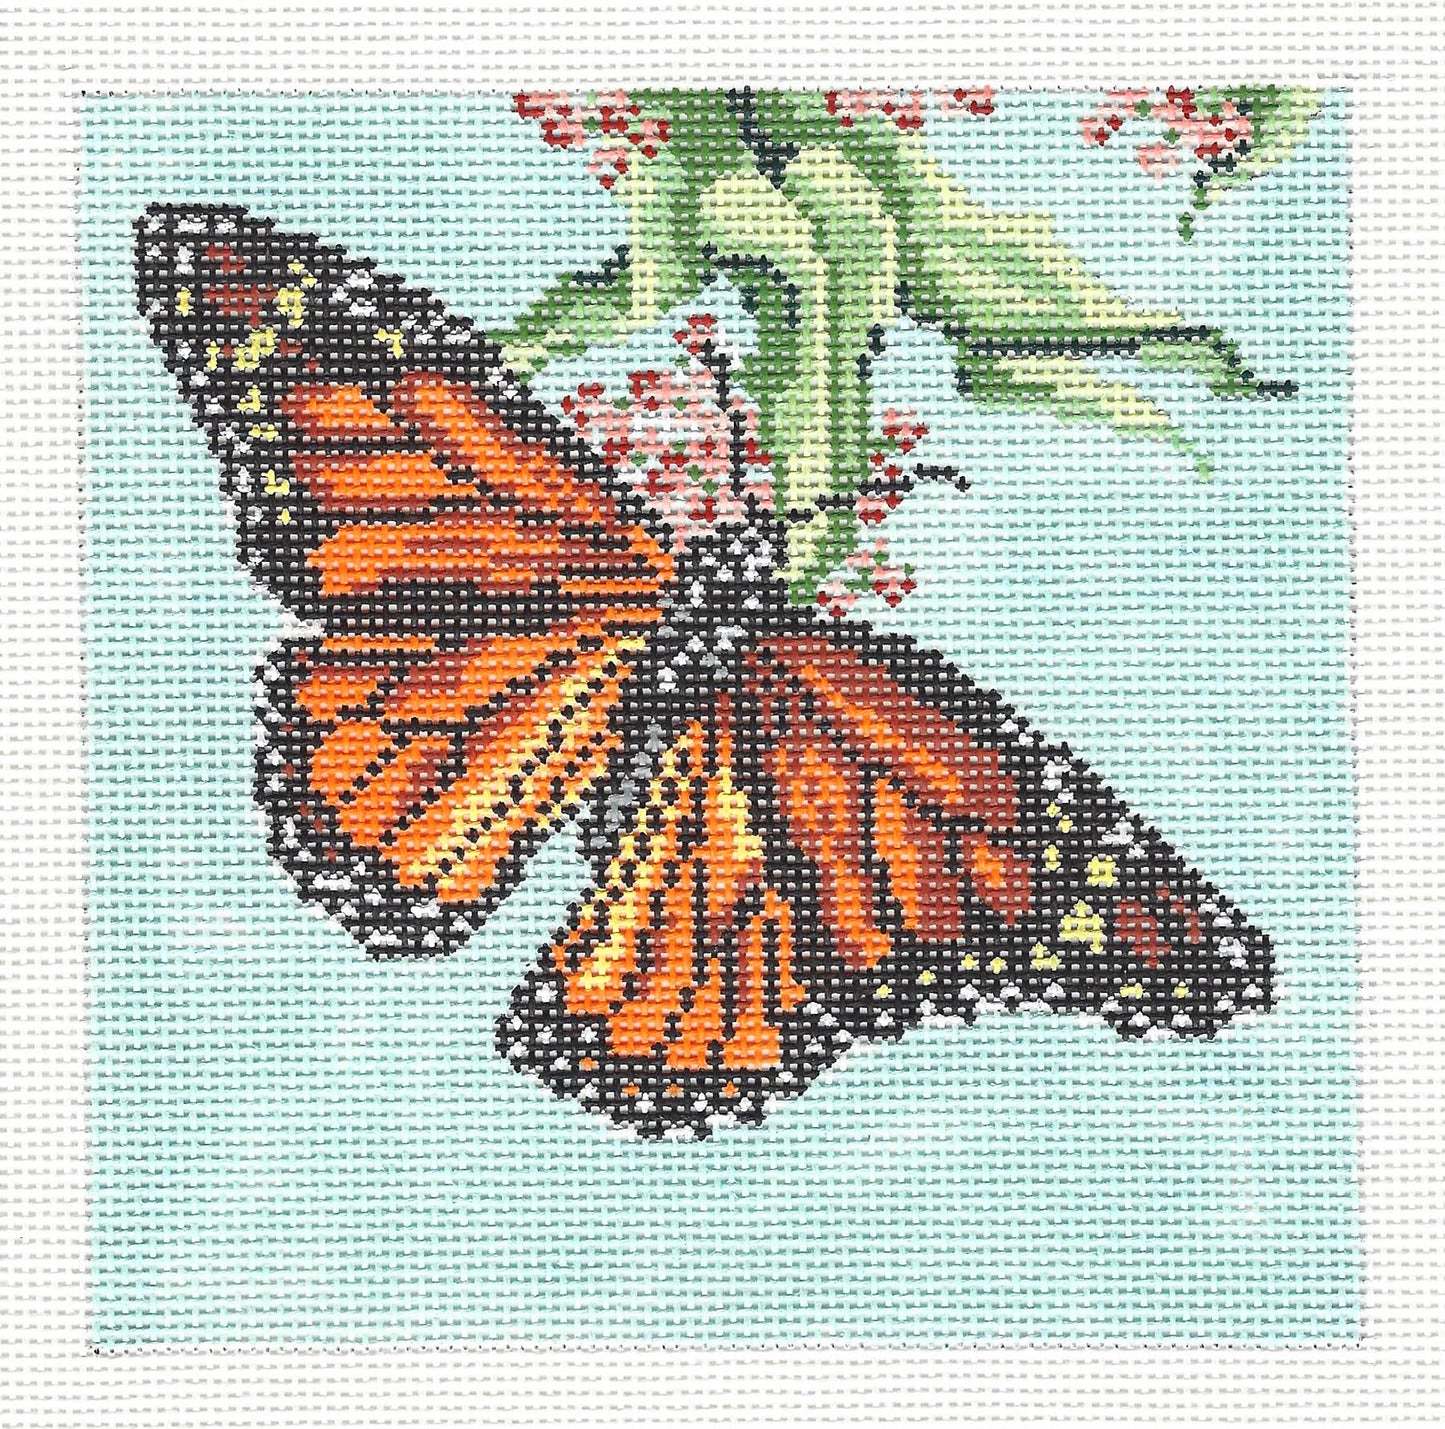 Butterfly Canvas ~ MONARCH Butterfly 6.75" Square 13 Mesh handpainted Needlepoint Canvas by Needle Crossings